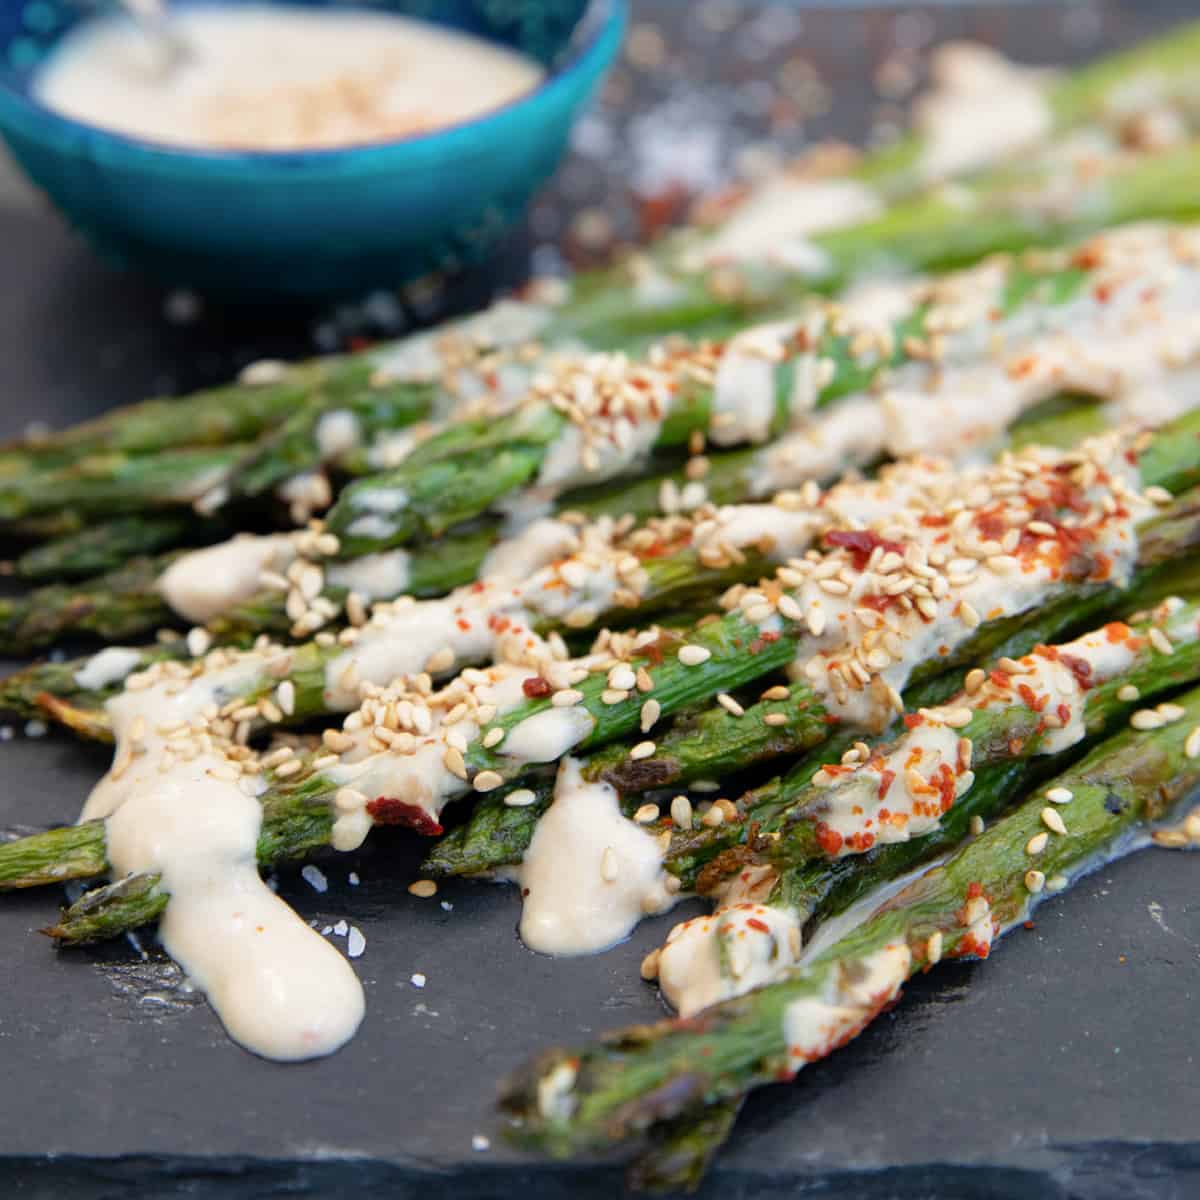 Grilled asparagus - ready in just 15 minutes - is an ideal side dish for your summer grilling. Crisp on the outside with a smokey flavor, this tasty recipe is an easy way to add healthy veggies to your barbeque spread.
